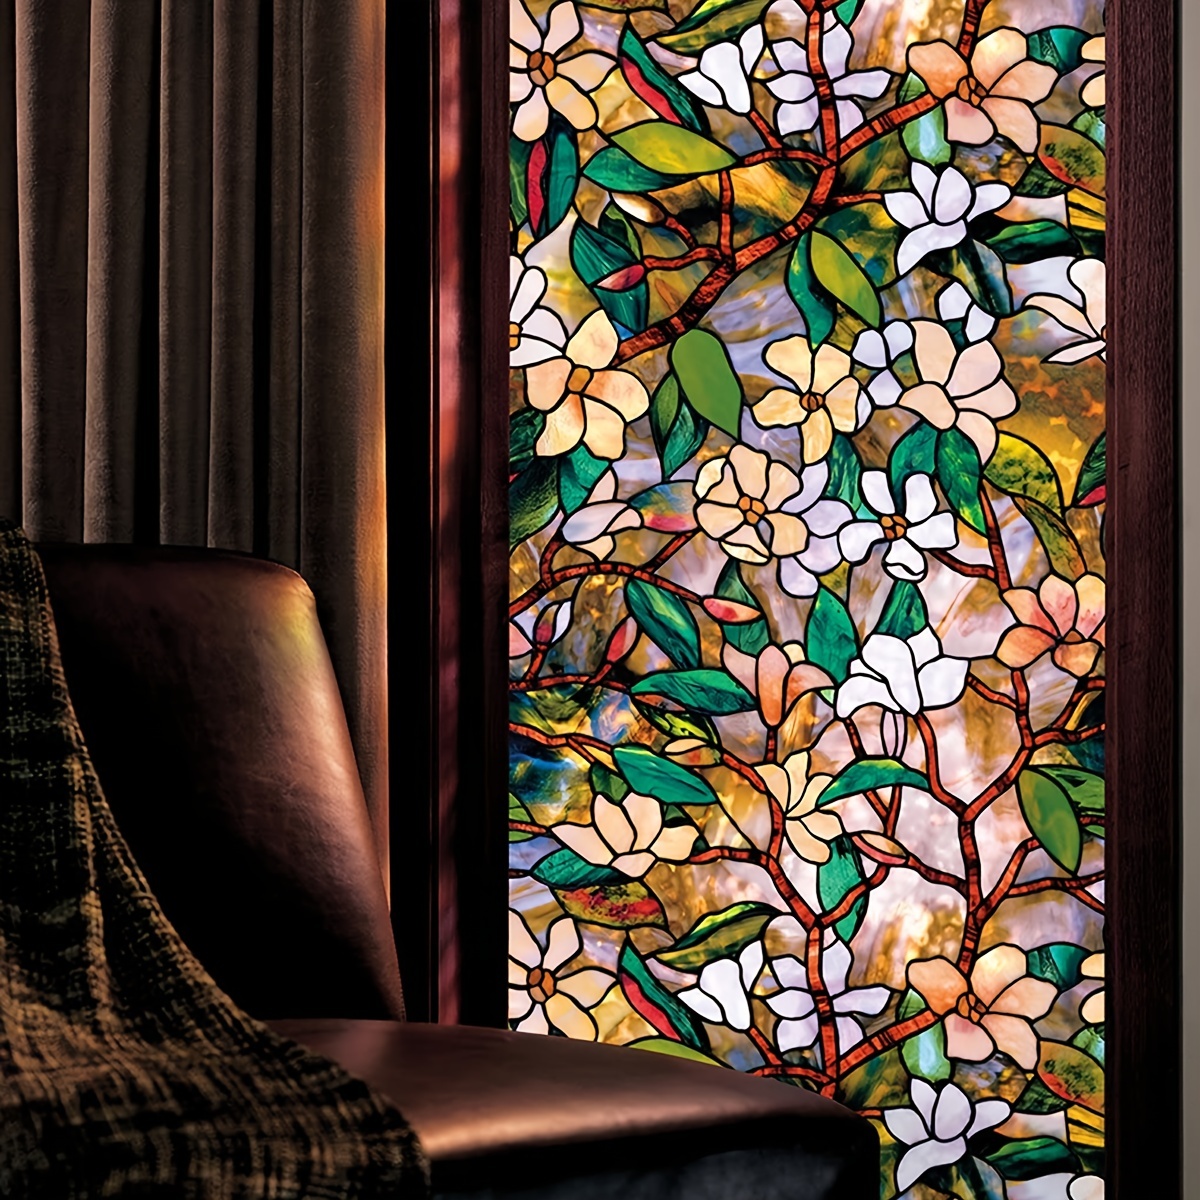 BuyDecorativeFilm 36 in. x 7.4 ft. 3ABST 3Abstract Stained Glass Window Film  3ABST-X-3PT - The Home Depot